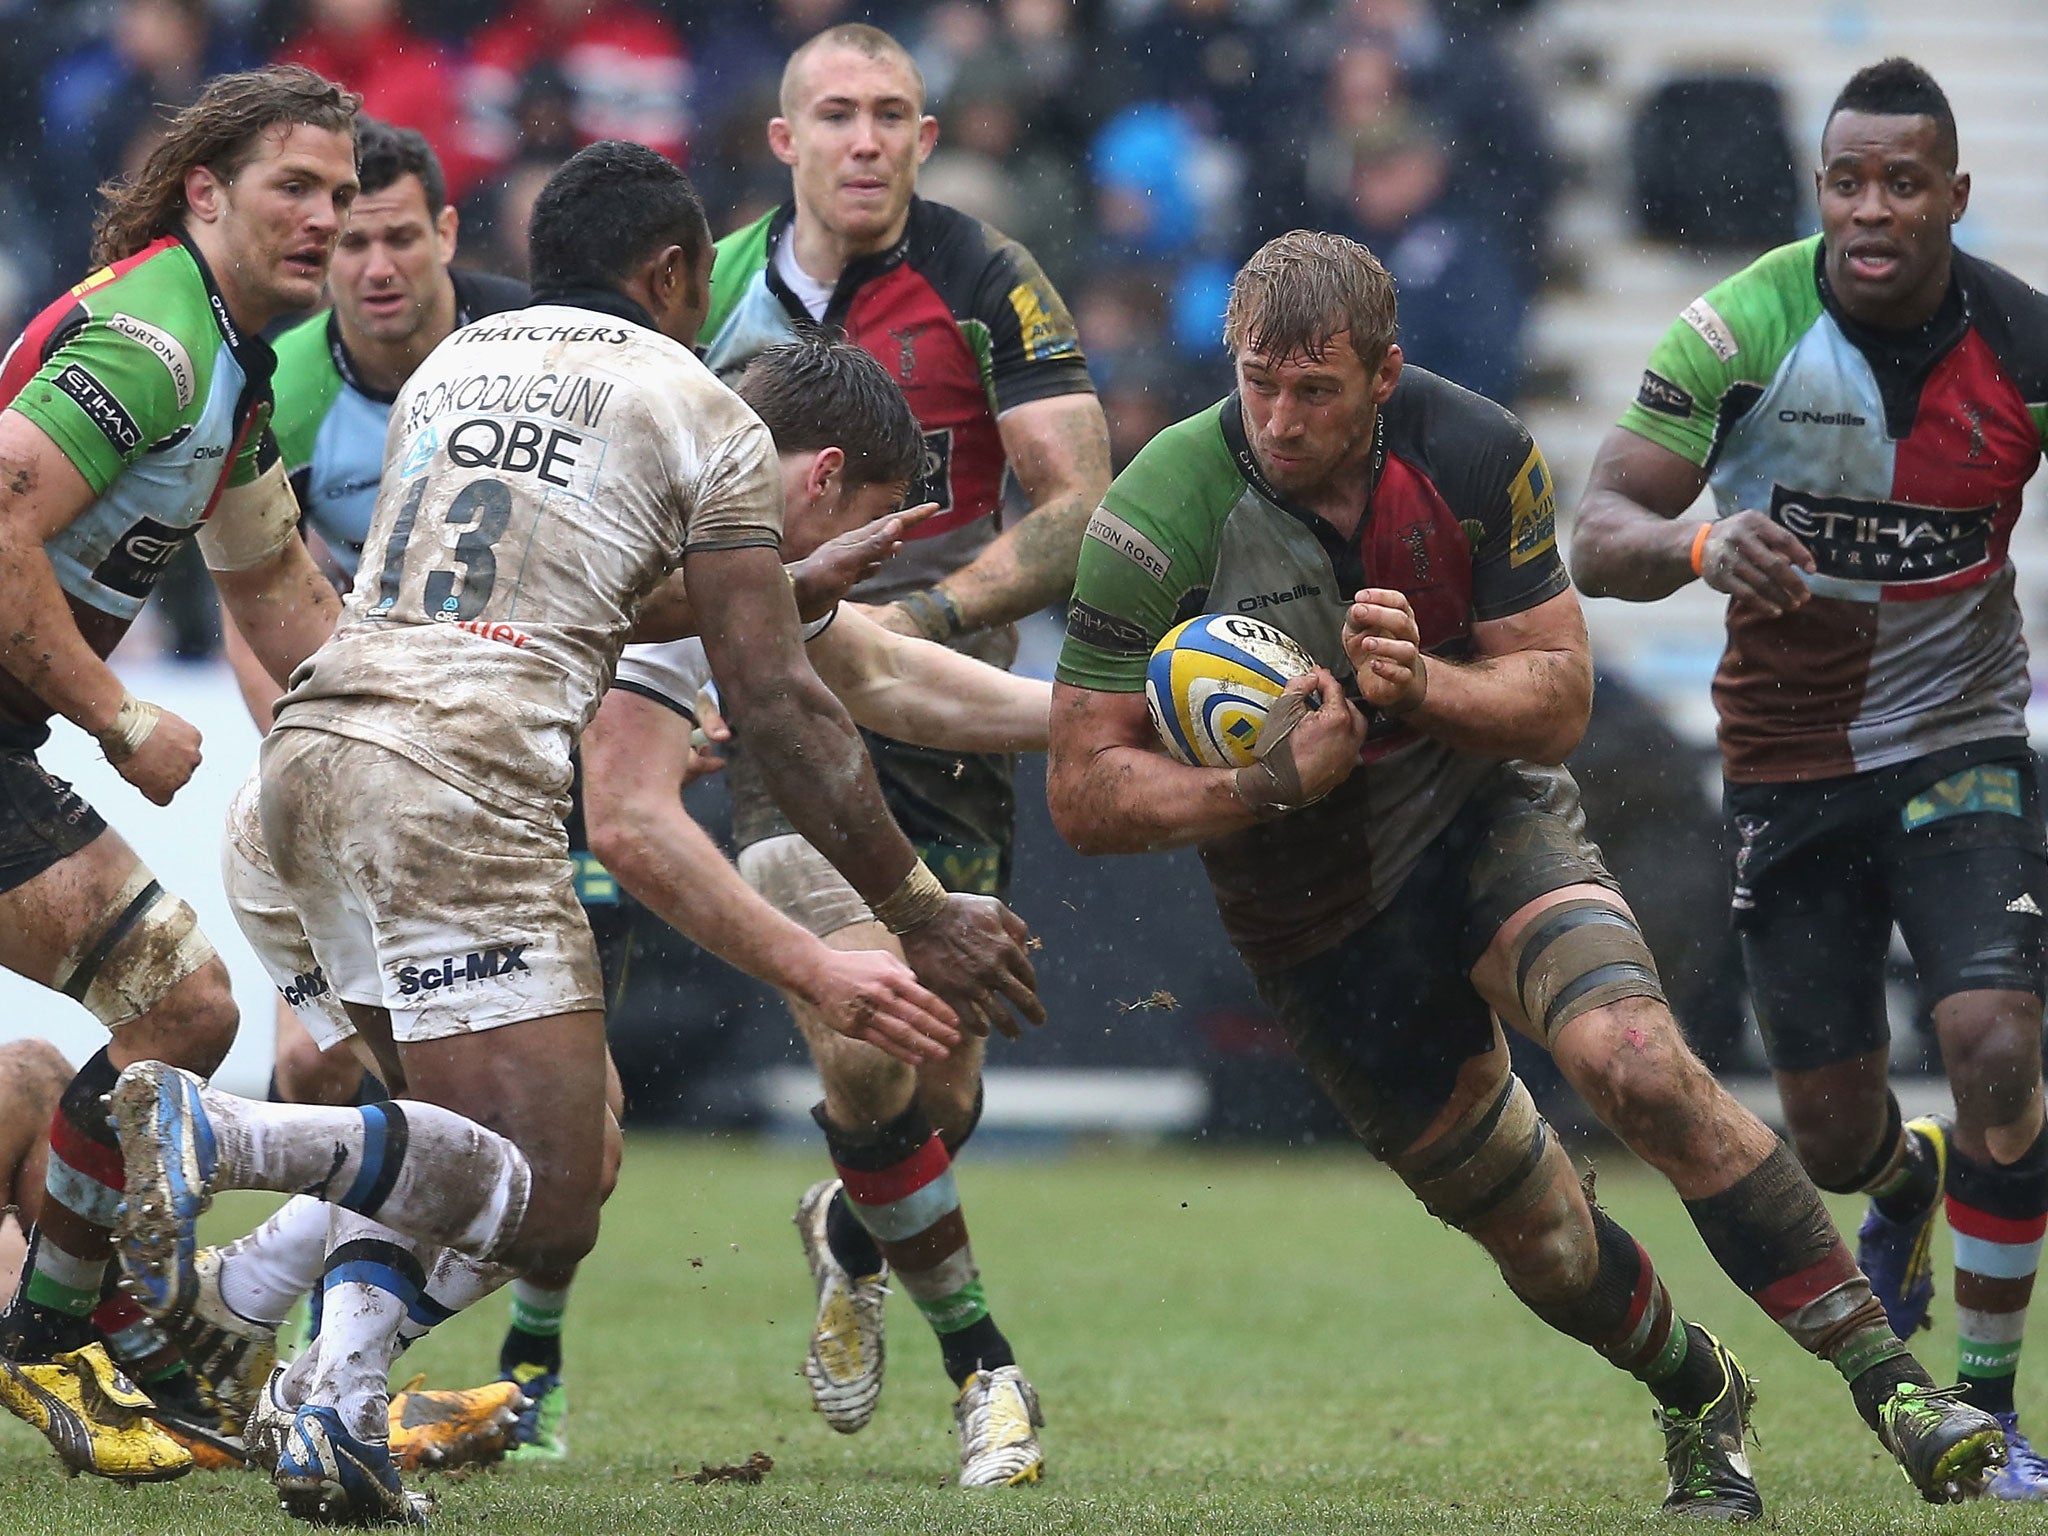 Fully charged: The Harlequins captain Chris Robshaw leads by example against Bath at The Stoop